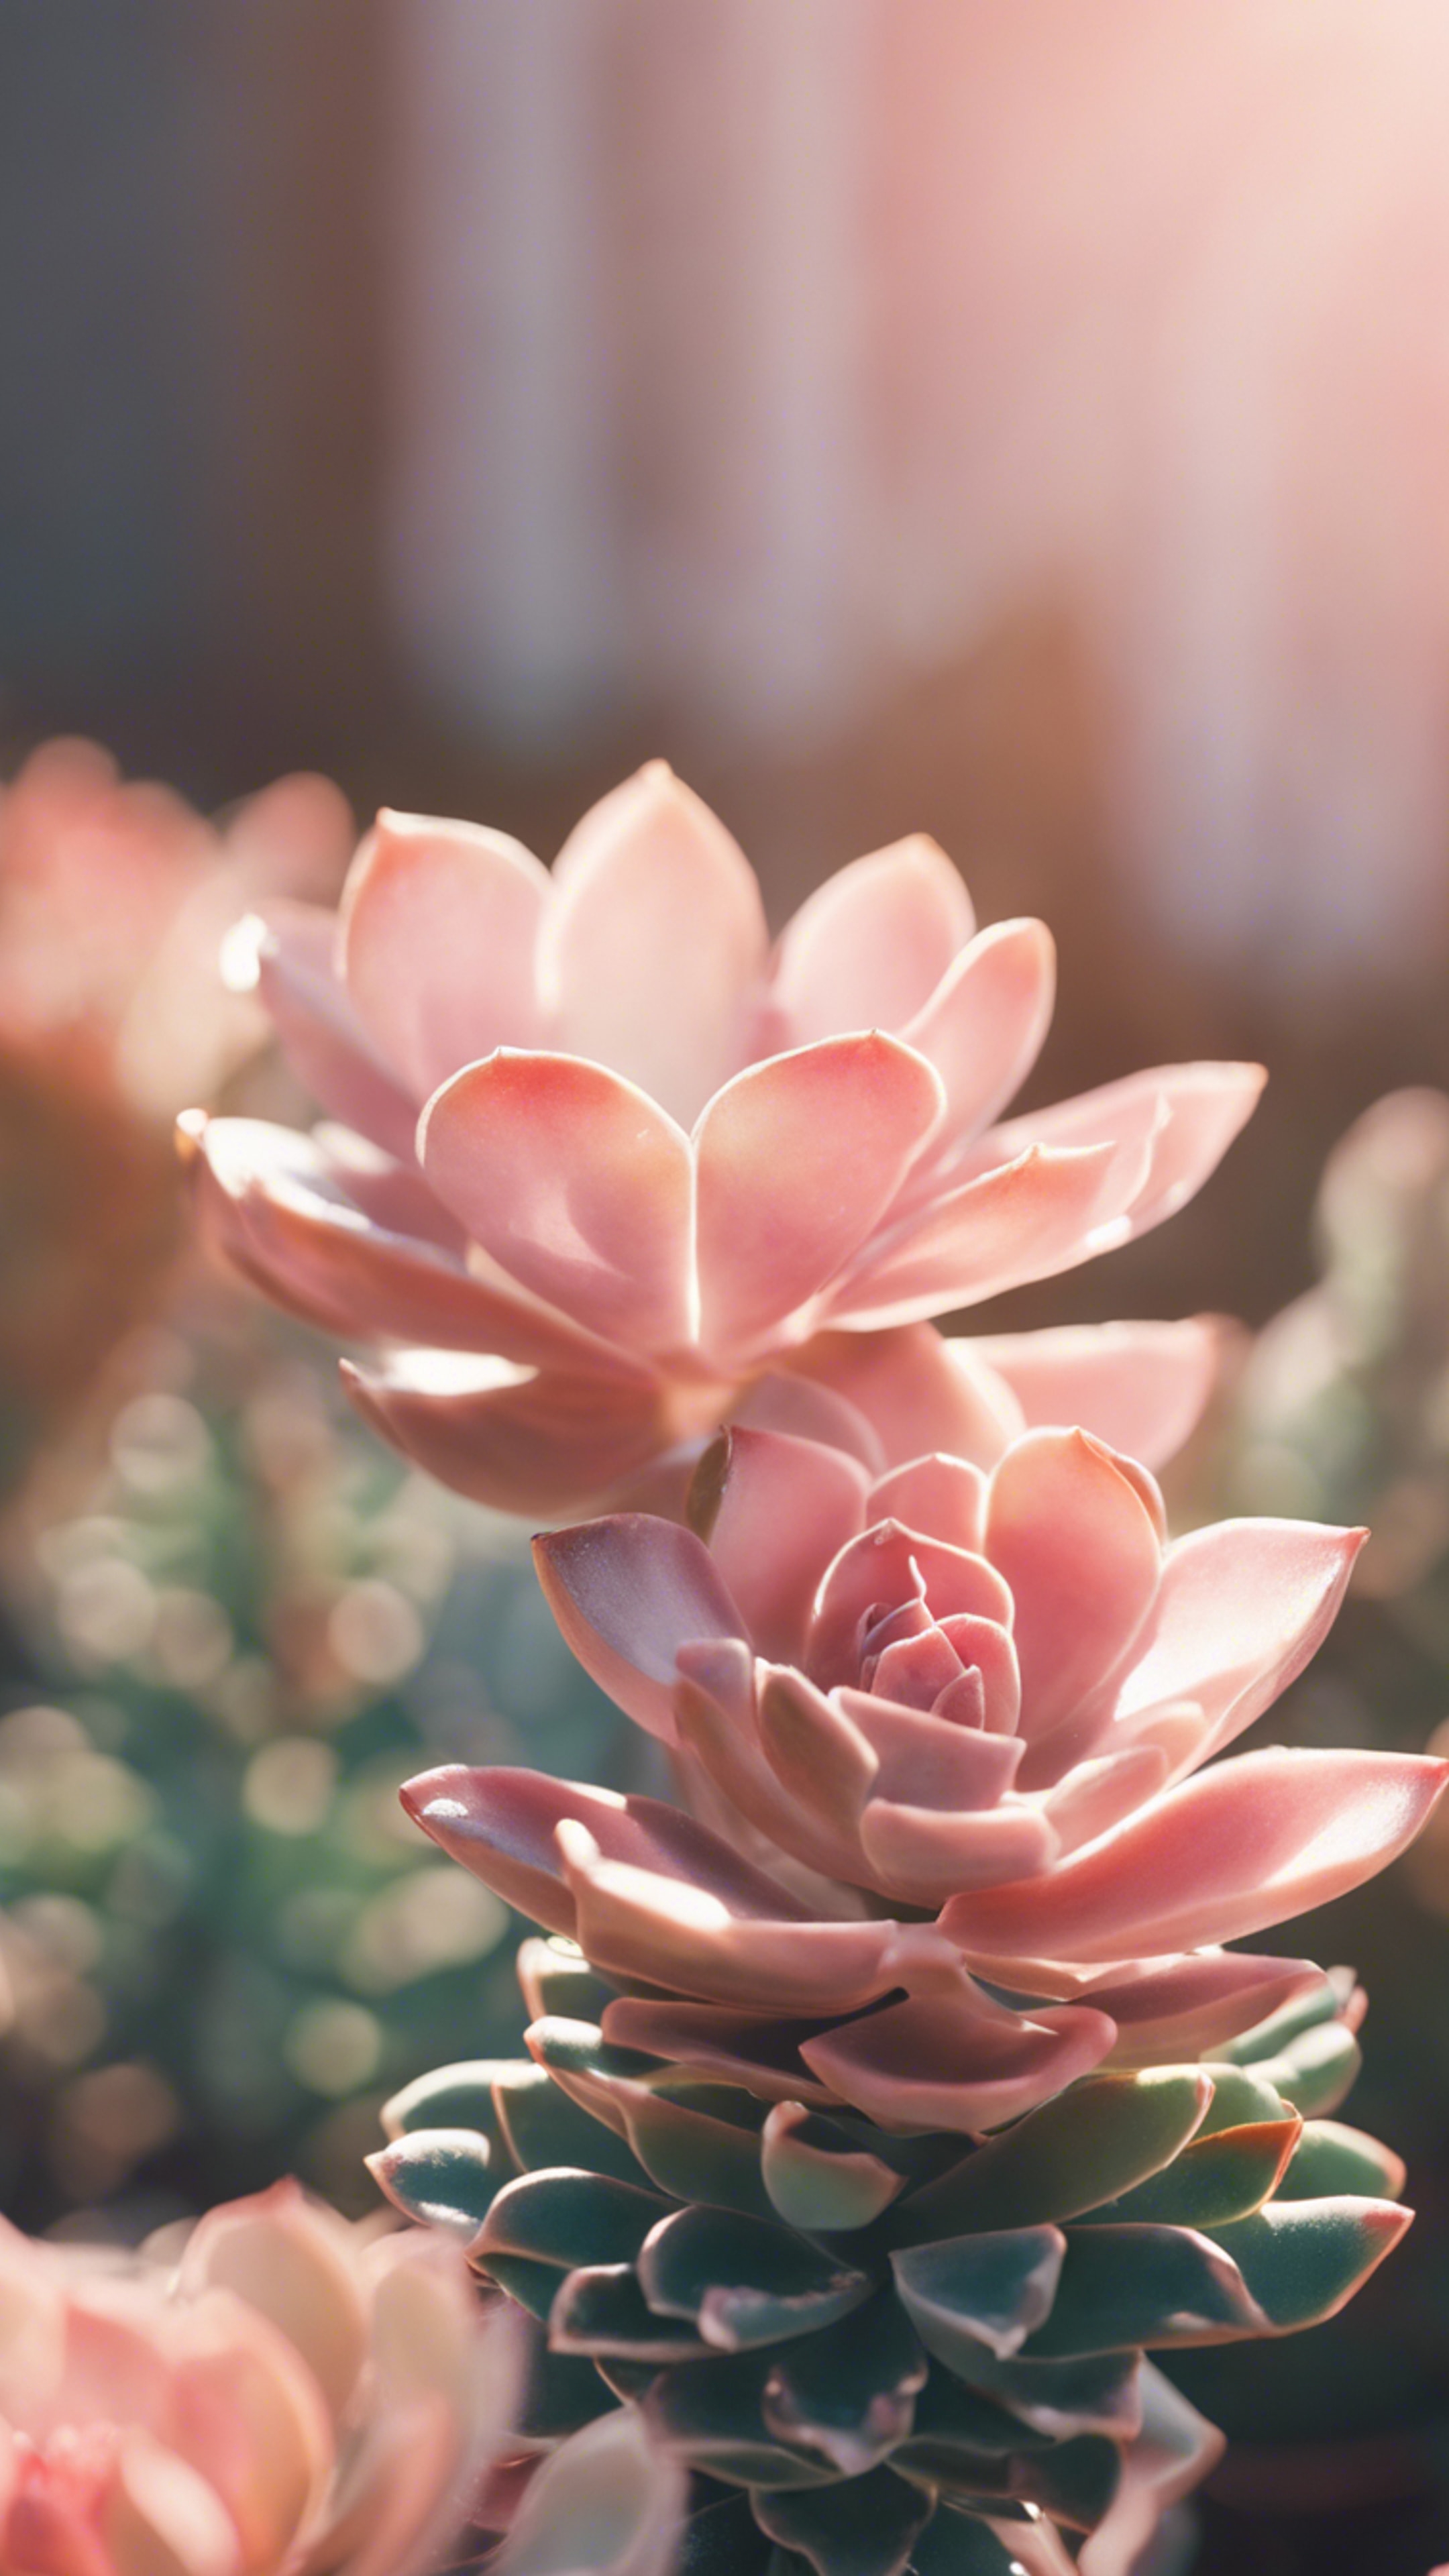 A close-up view of a preppy pastel pink succulent plant bathed in gentle morning sunshine. Sfondo[96679d4148894c129b05]